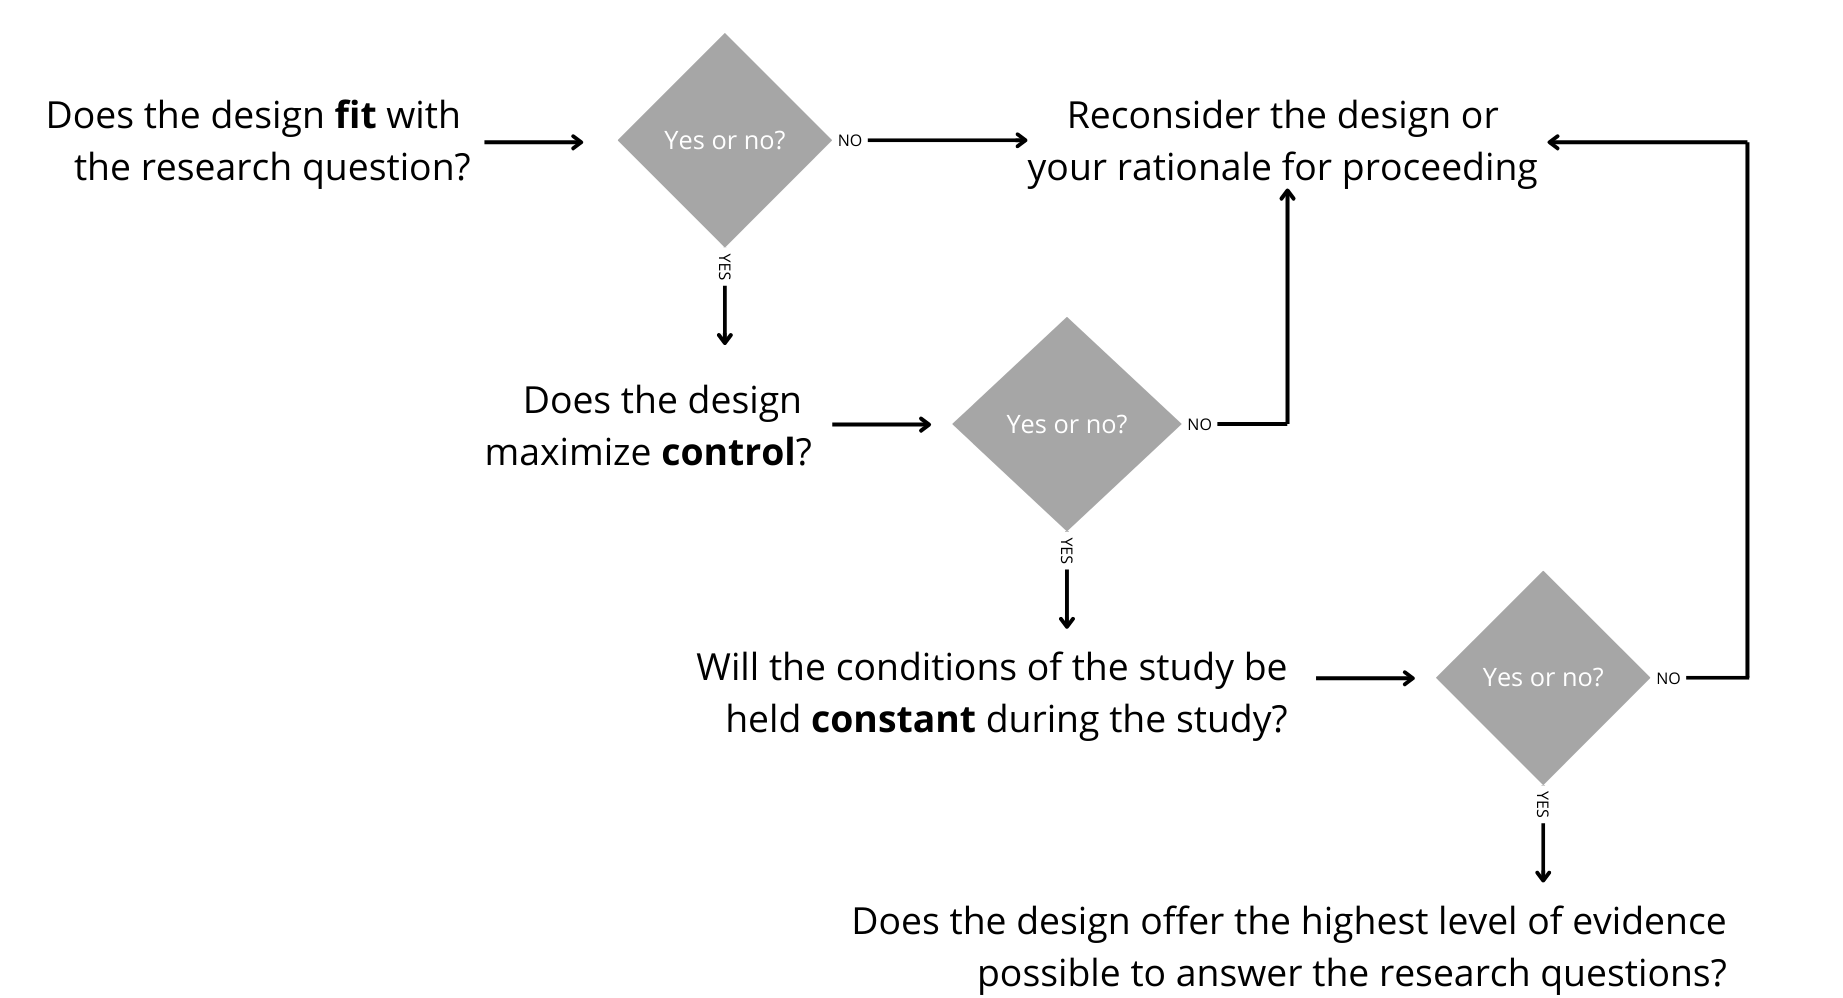 Figure 2. Important Aspects and Considerations of Research Designs